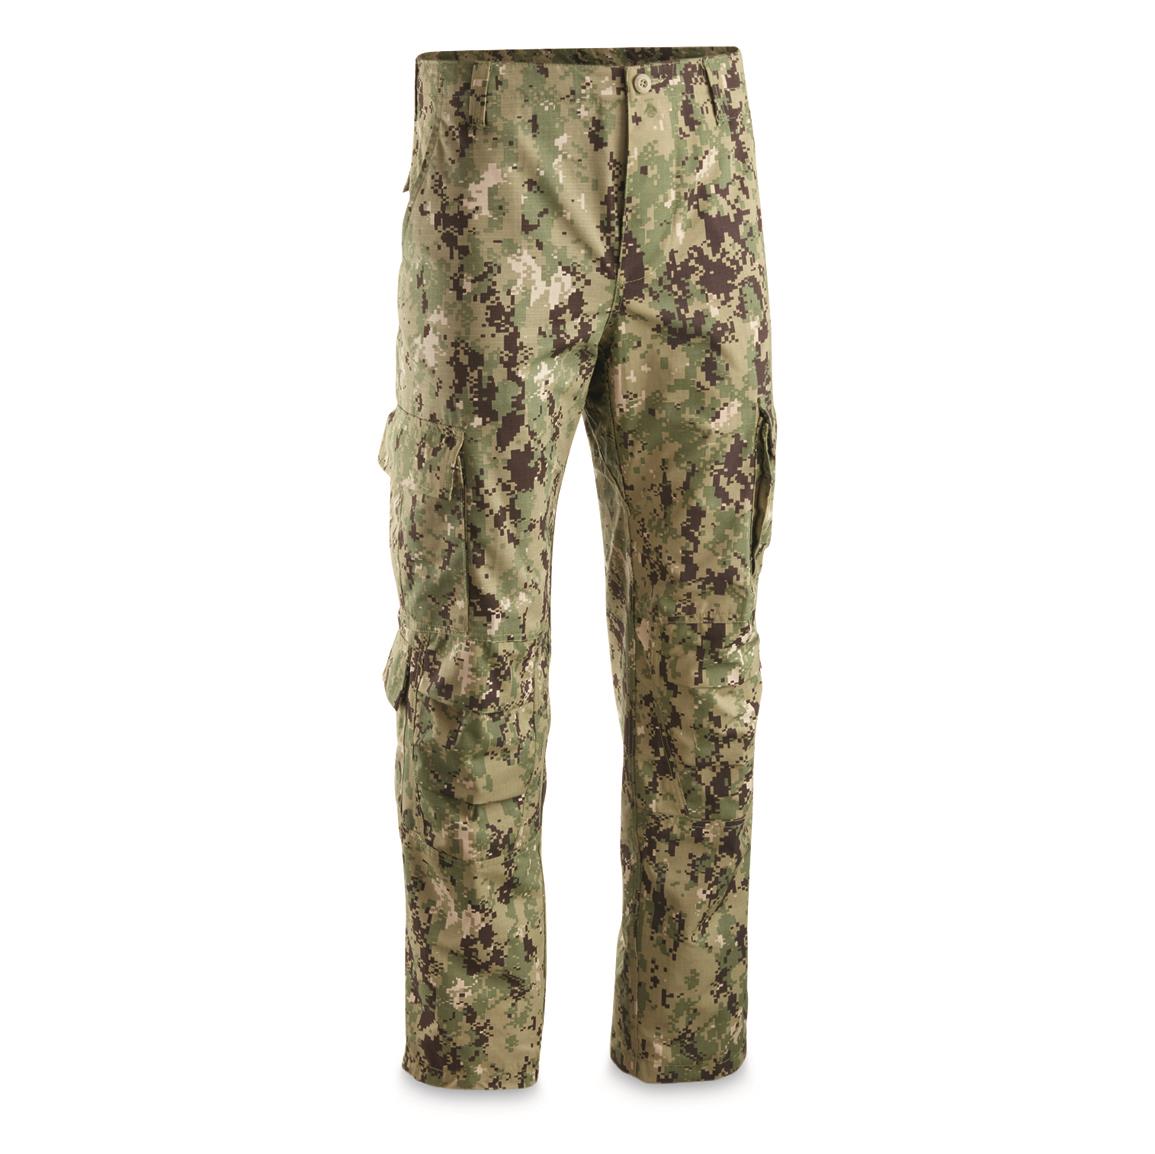 Brooklyn Armed Forces BDU Pants in Navy AOR Camo, New, Aor